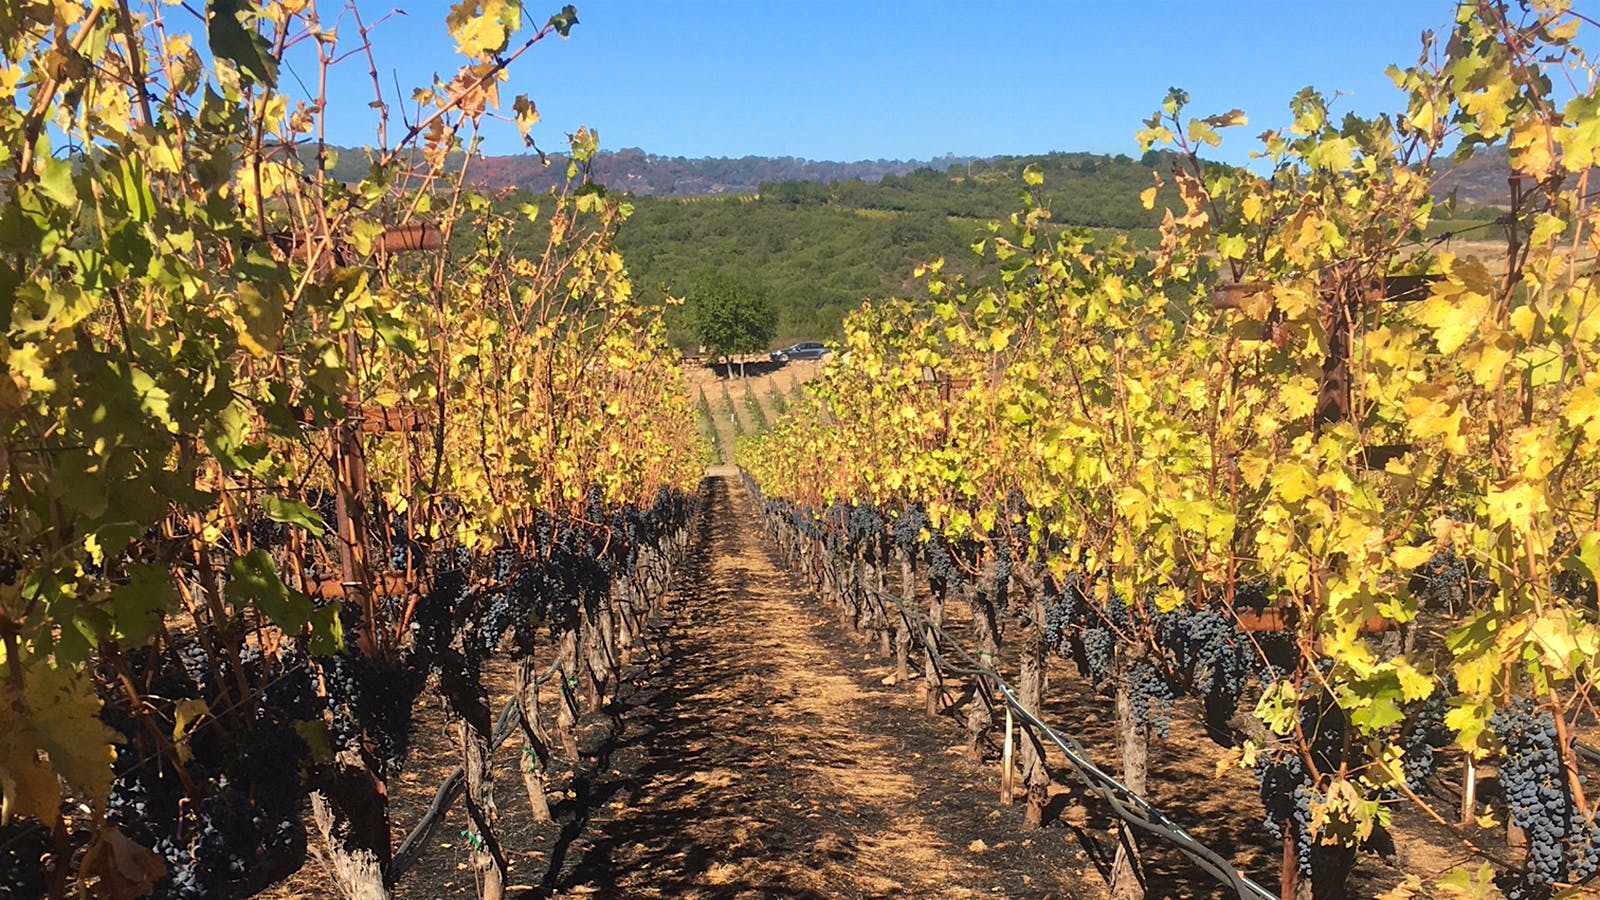 Oct. 20, 3:30 p.m. PST: Northern California Vintners Assess Wildfire Damage